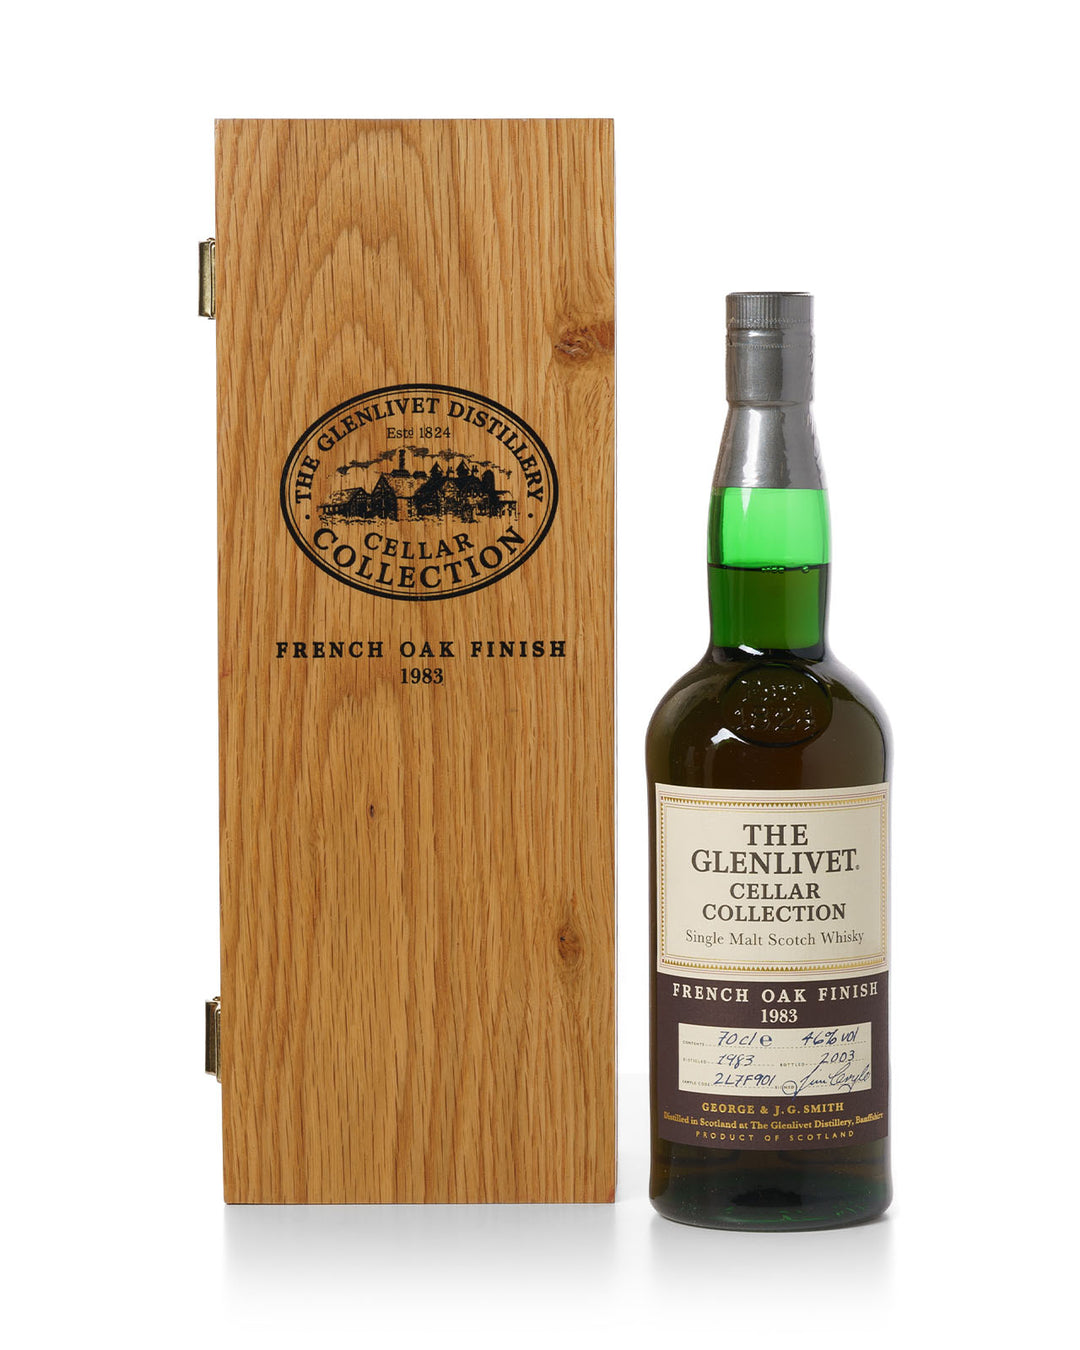 Glenlivet 1983 French Oak Finish Cellar Collection With Original Wooden Box